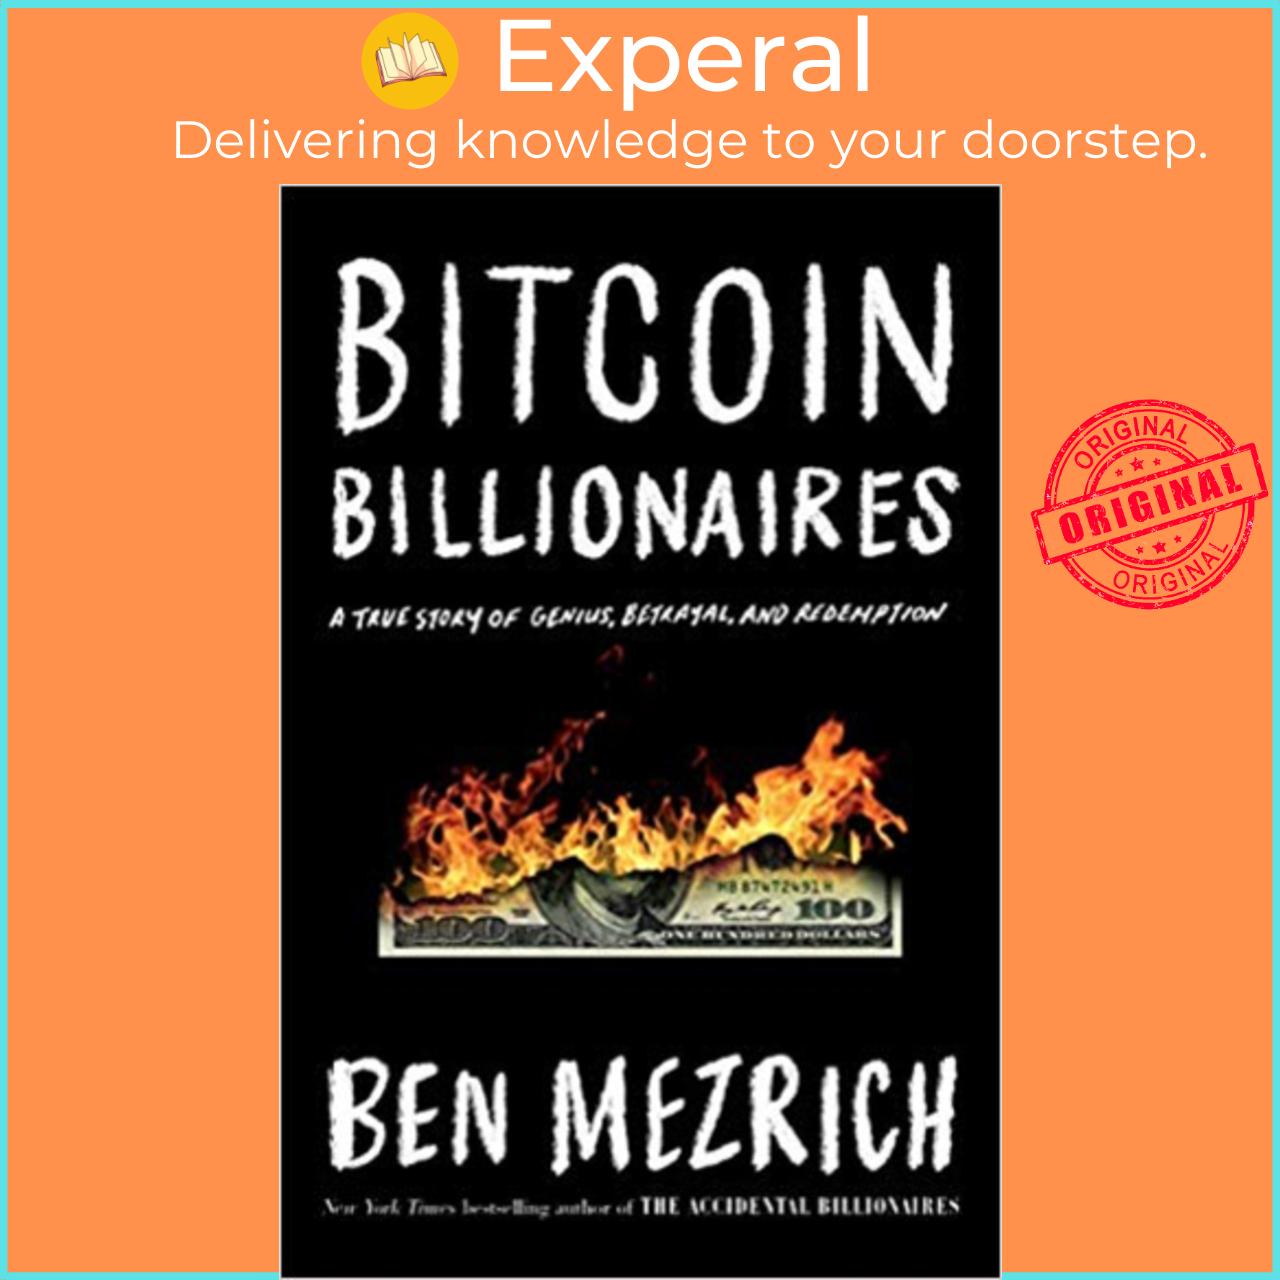 Sách - Bitcoin Billionaires : A True Story of Genius, Betrayal, and Redemption by Ben Mezrich (US edition, paperback)